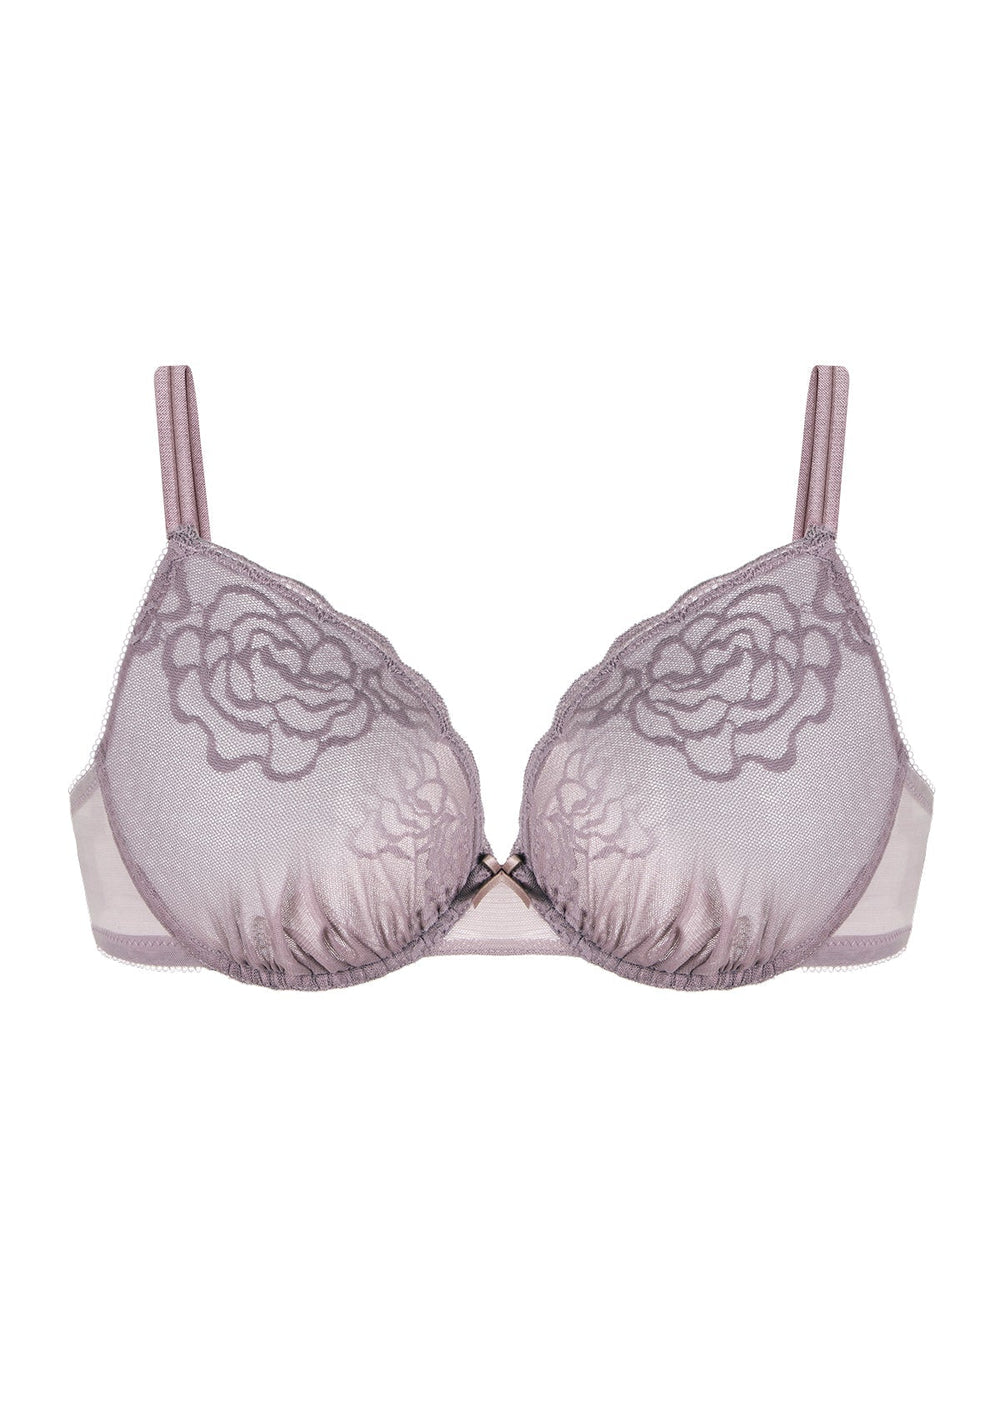 Buy Pretty lilac and pink cupless underwire embriodery lace bra bra89  Online